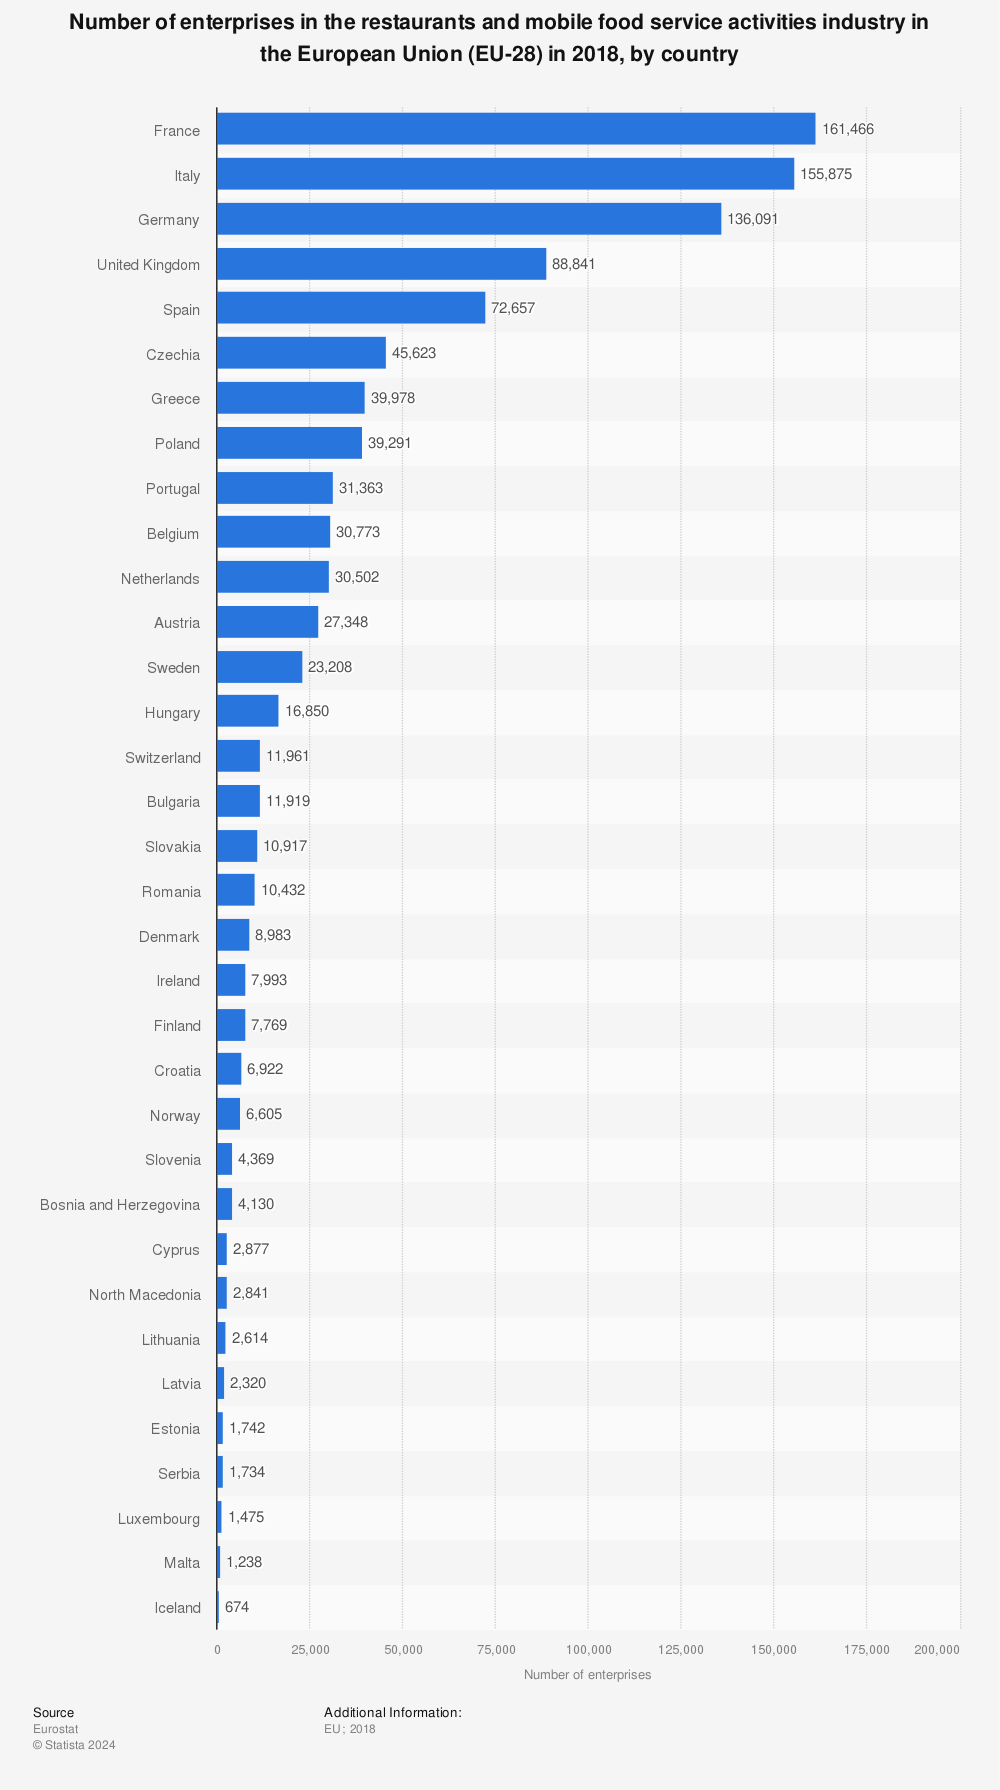 Statistic: Number of enterprises in the restaurants and mobile food service activities industry in the European Union (EU-28) in 2018, by country | Statista